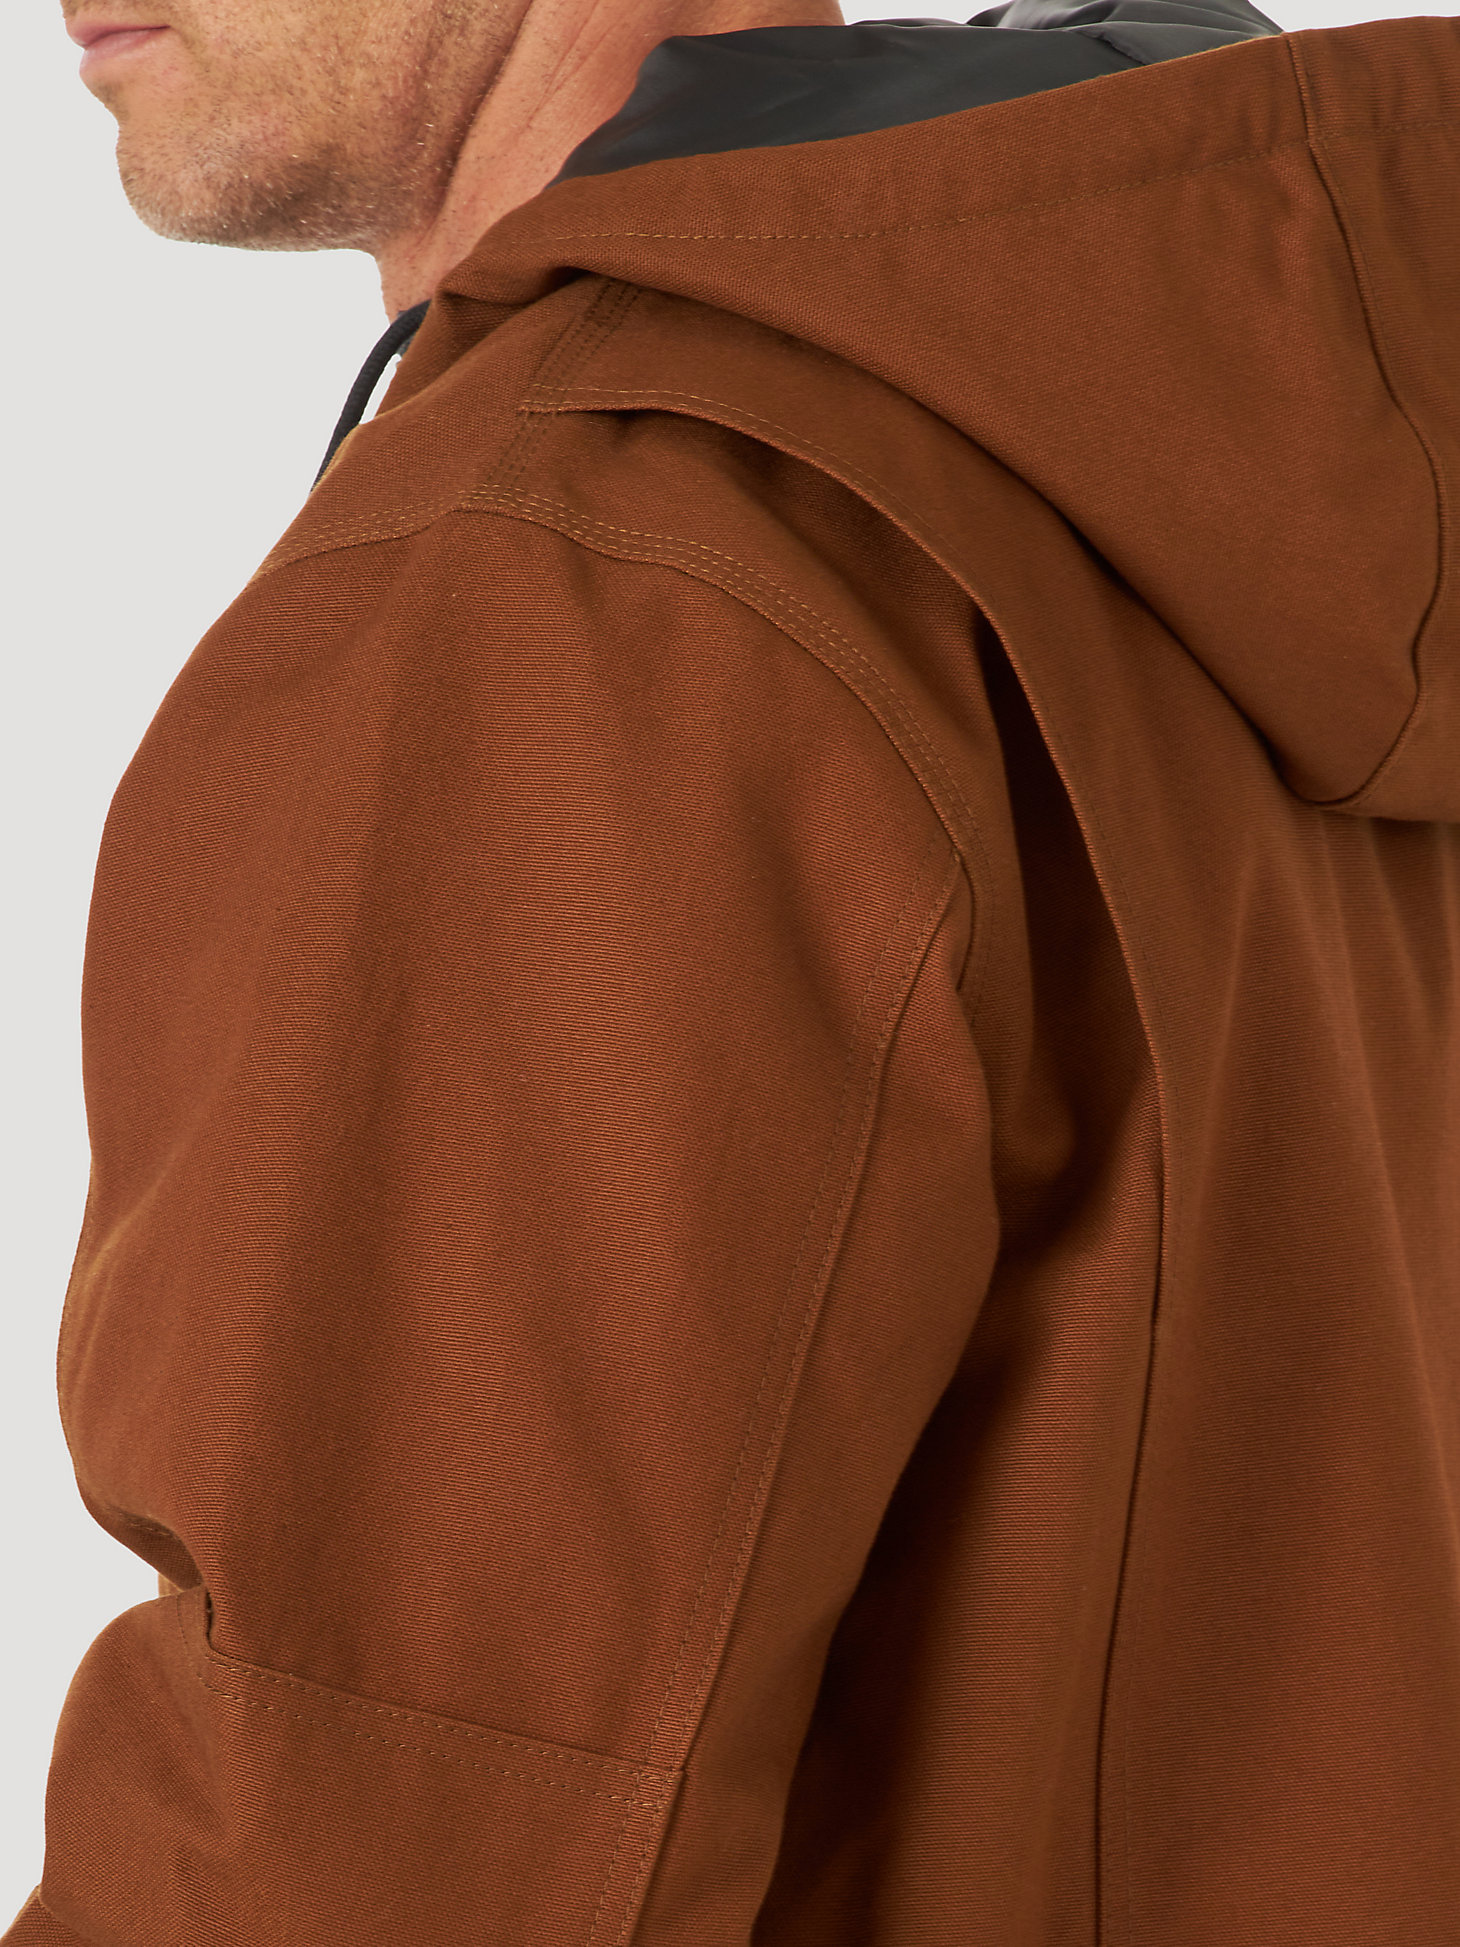 Wrangler® RIGGS Workwear® Tough Layers Insulated Canvas Work Jacket in Toffee alternative view 4